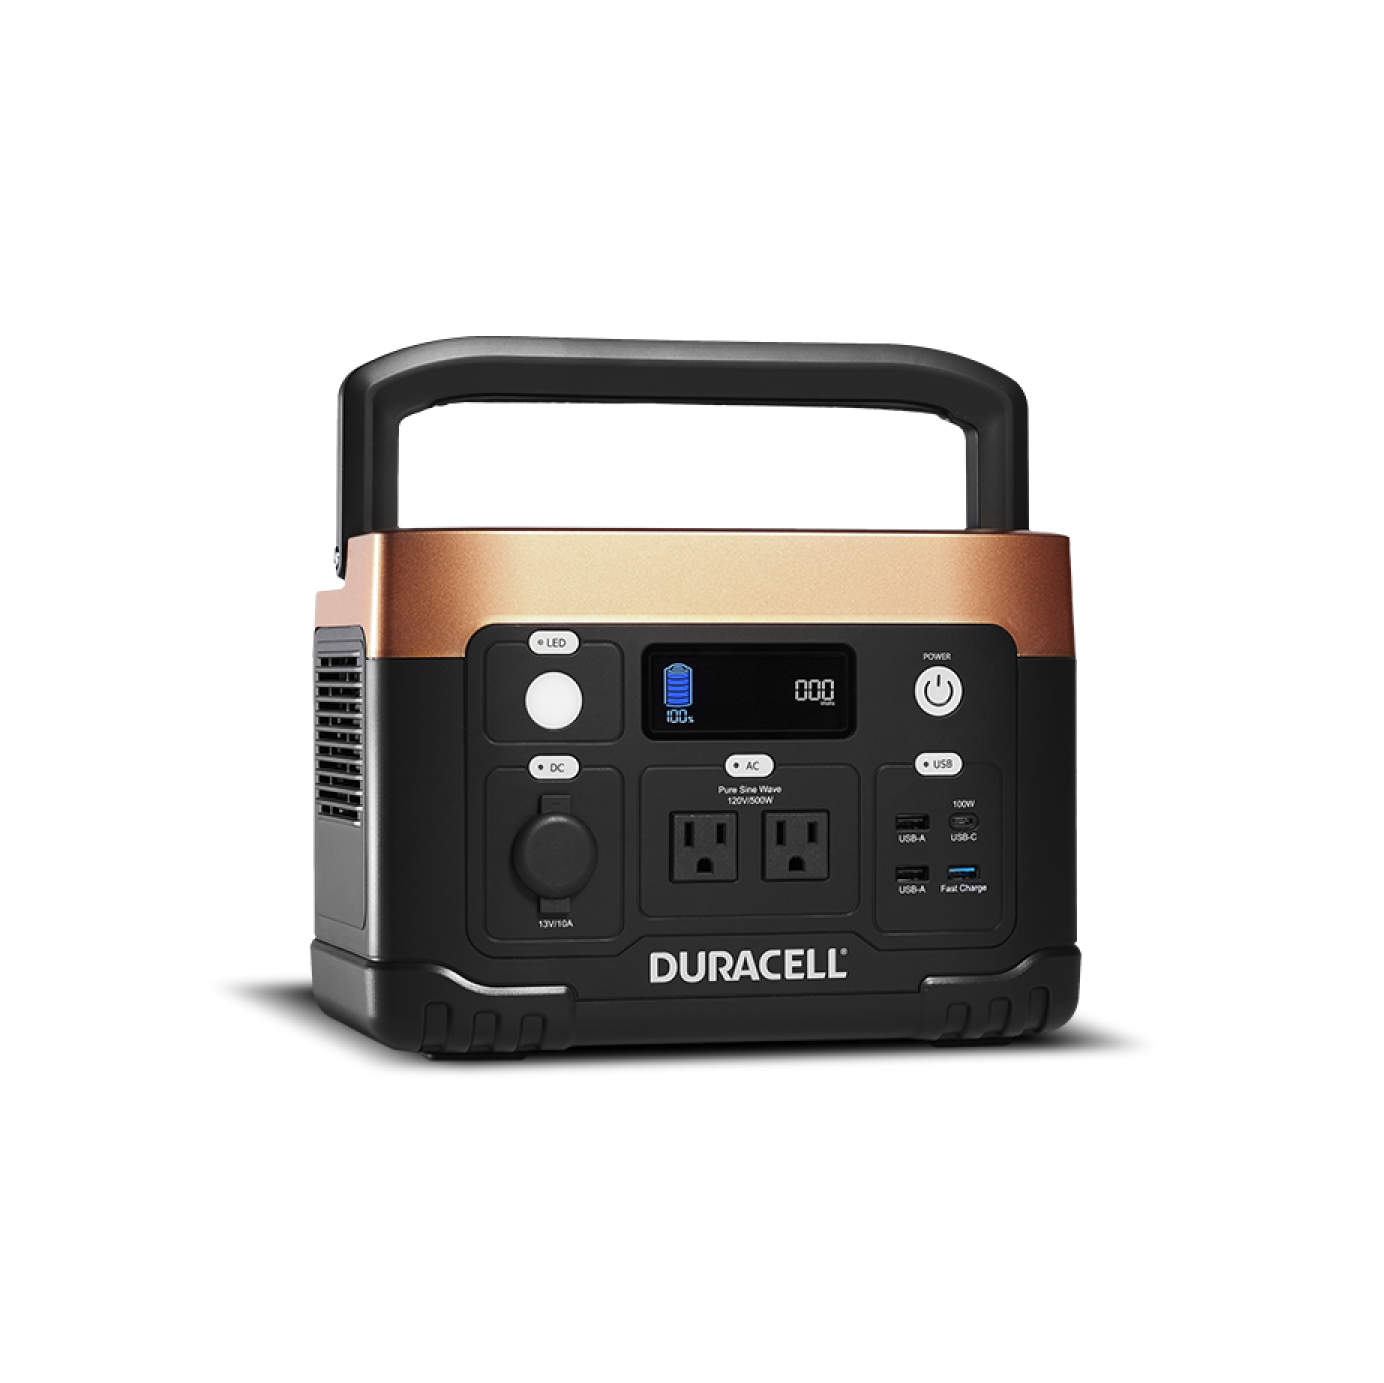 Duracell Power Station